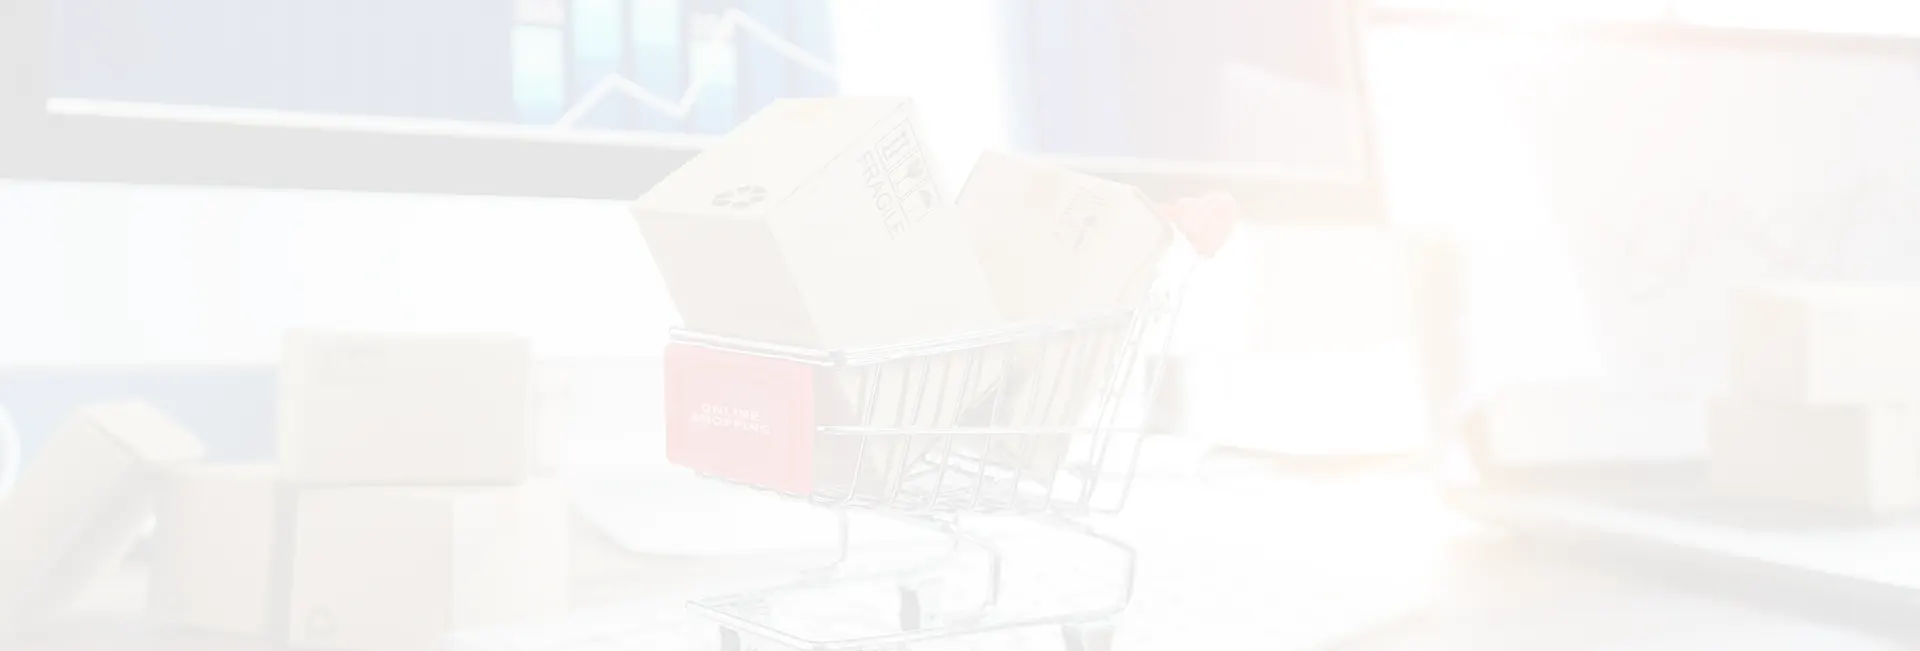 PXM E-Commerce Product Experience Management